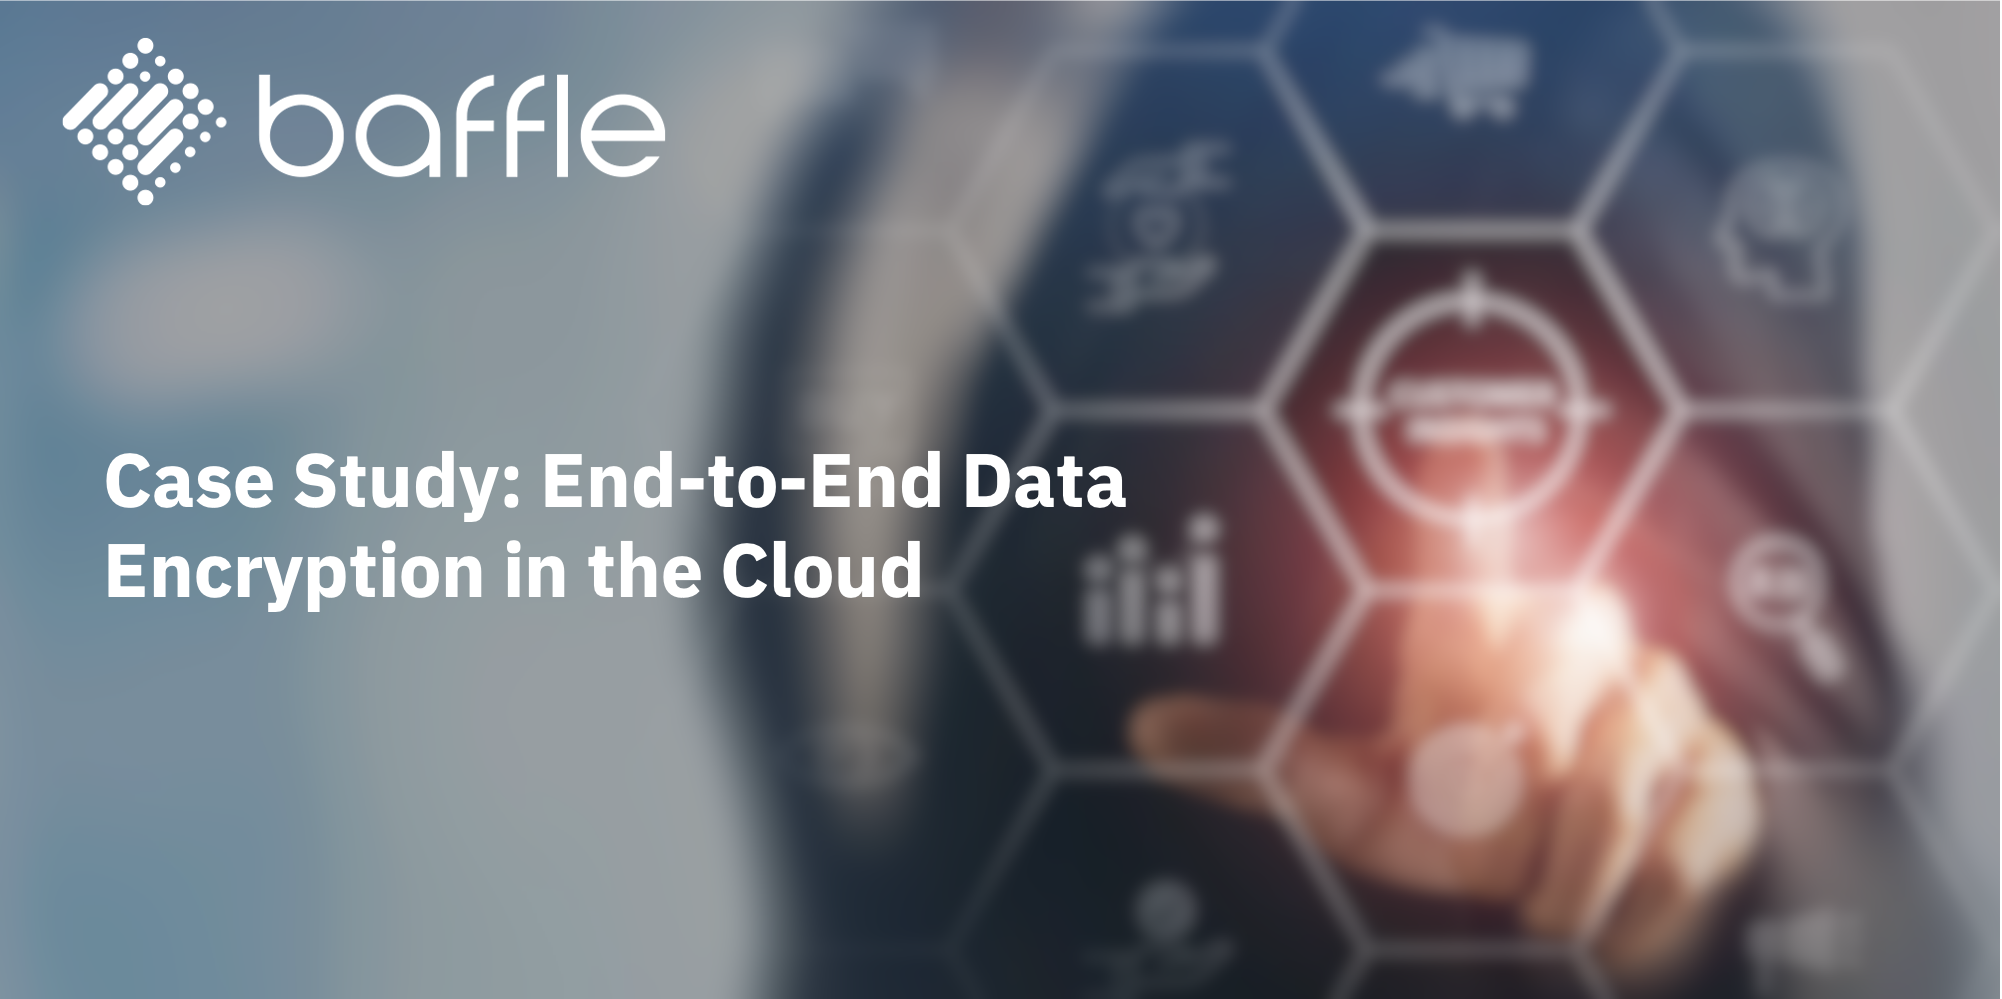 Case End-to-end Data Encryption in the Cloud